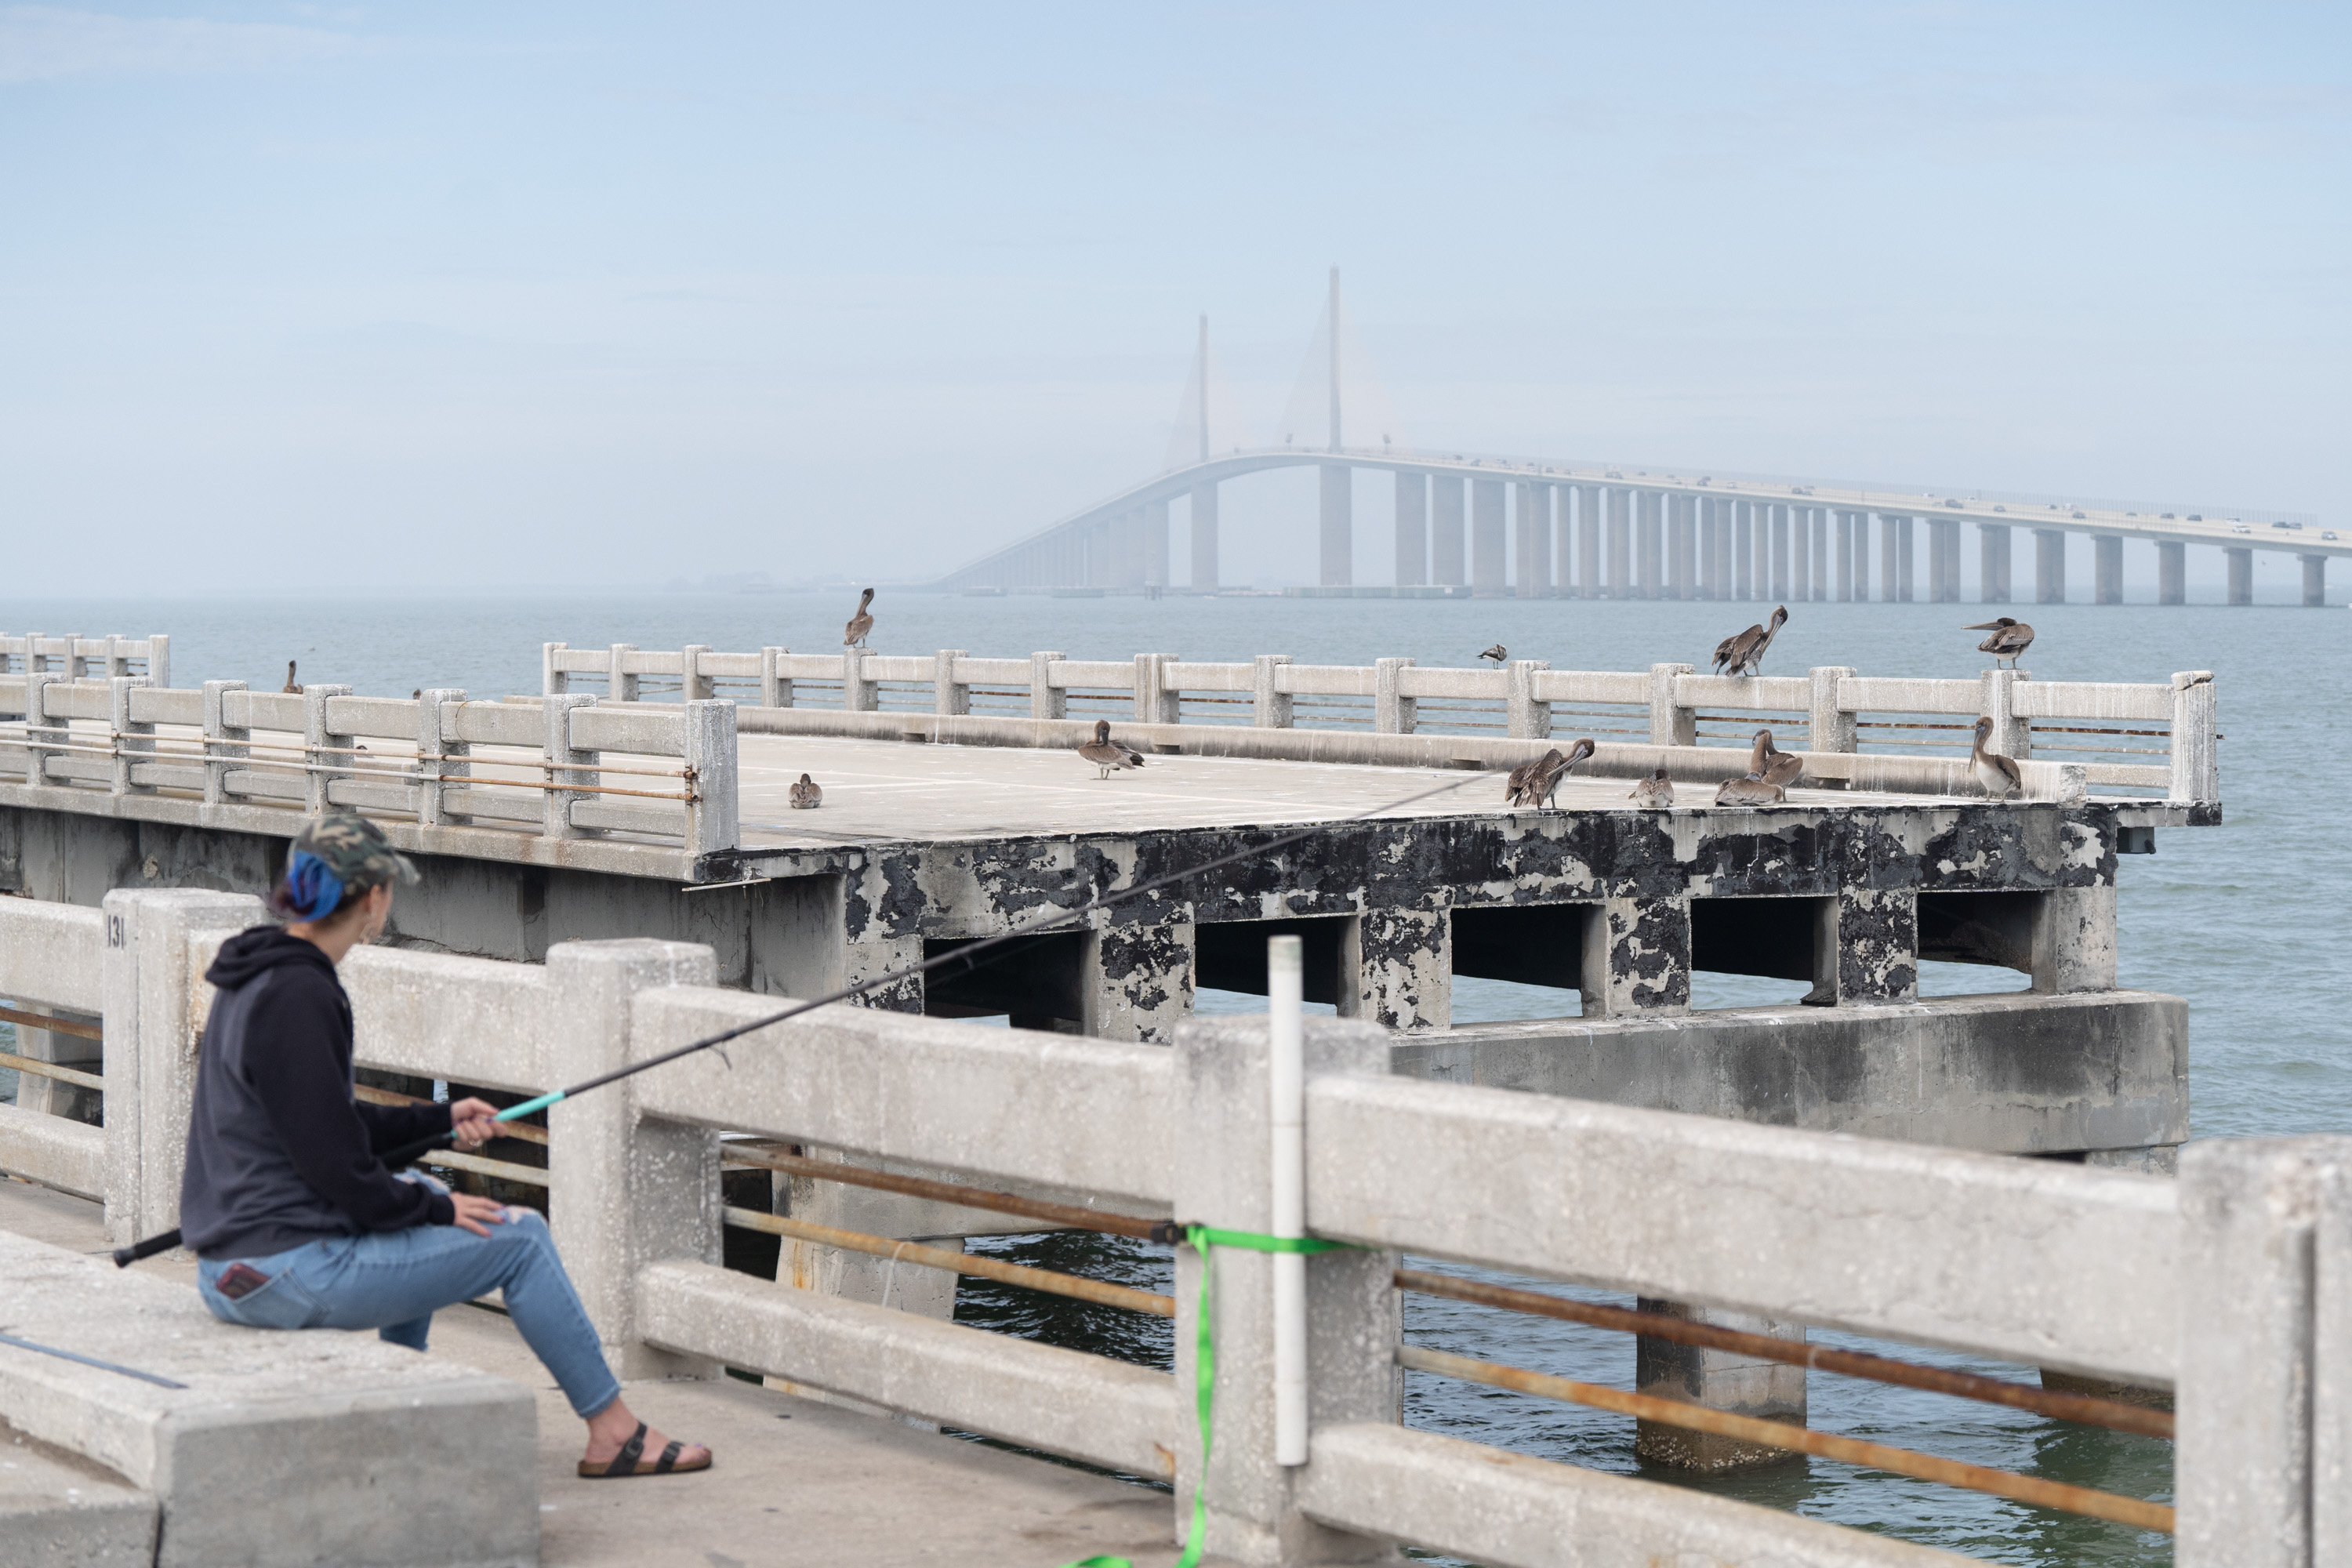 Want to fish at Skyway Pier? New rules may be coming for anglers. Here's  what to know.